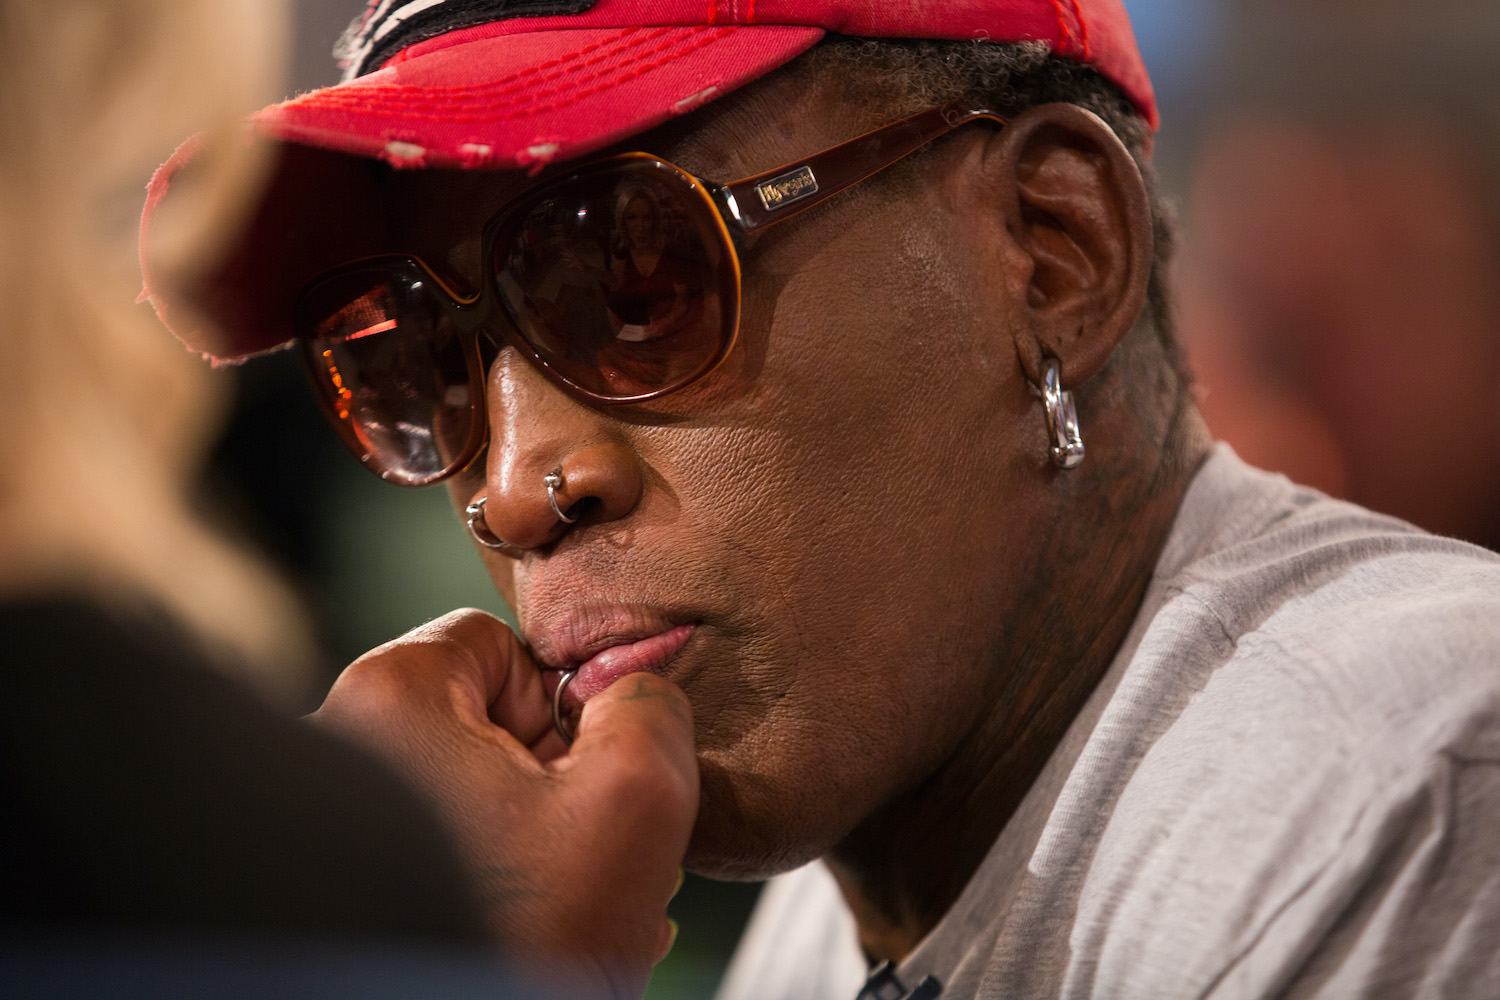 Dennis Rodman Quote: “I lost $35,000 in less than a week at the